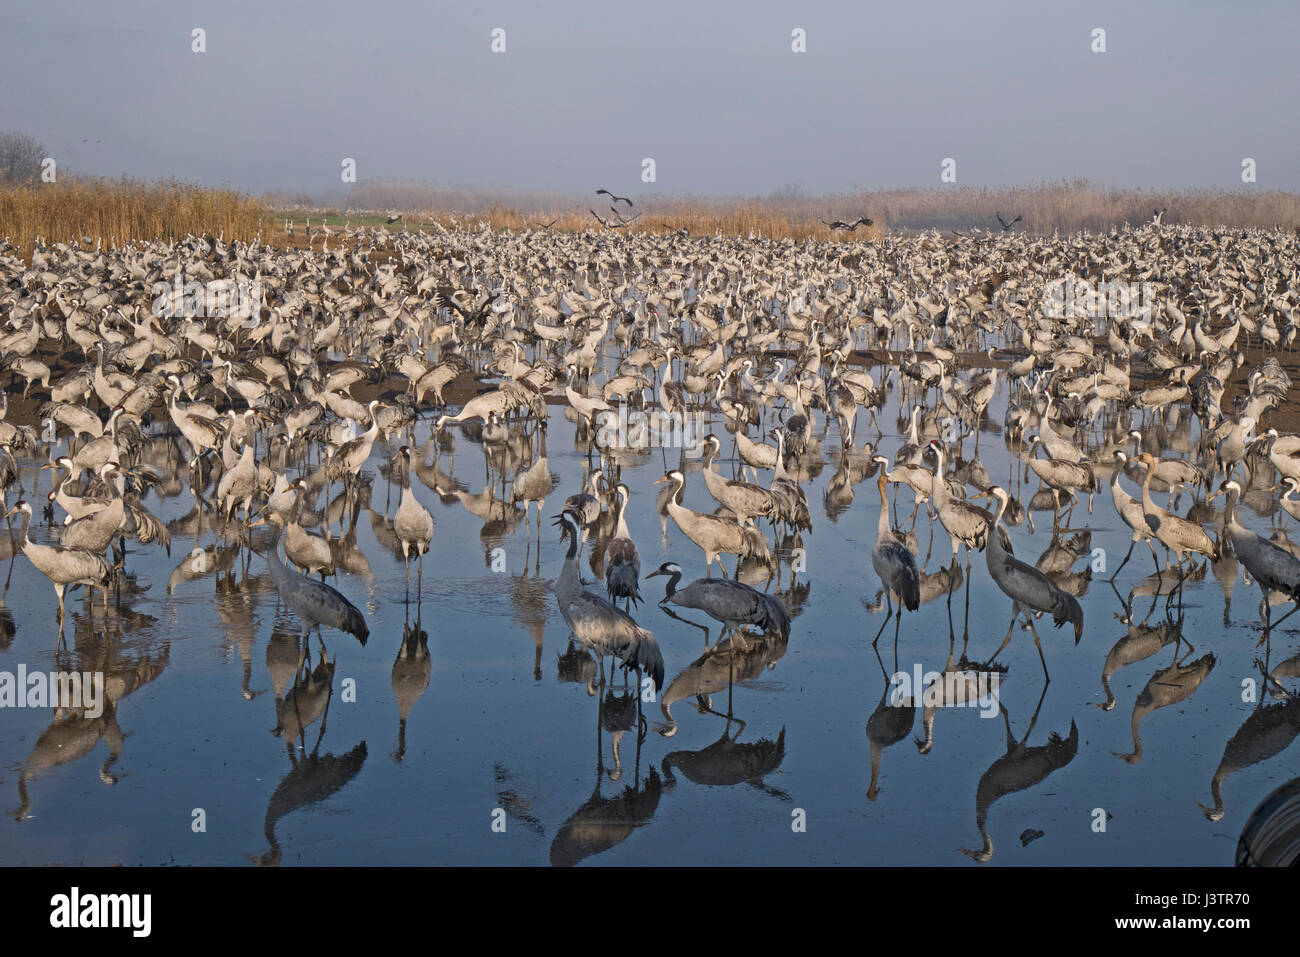 Common Cranes Grus grus, wintering at  the Hula Lake Park, Hula Valley Northern Israel.  Farmers spread 8 tons of Maize a day on to the marsh to keep Stock Photo